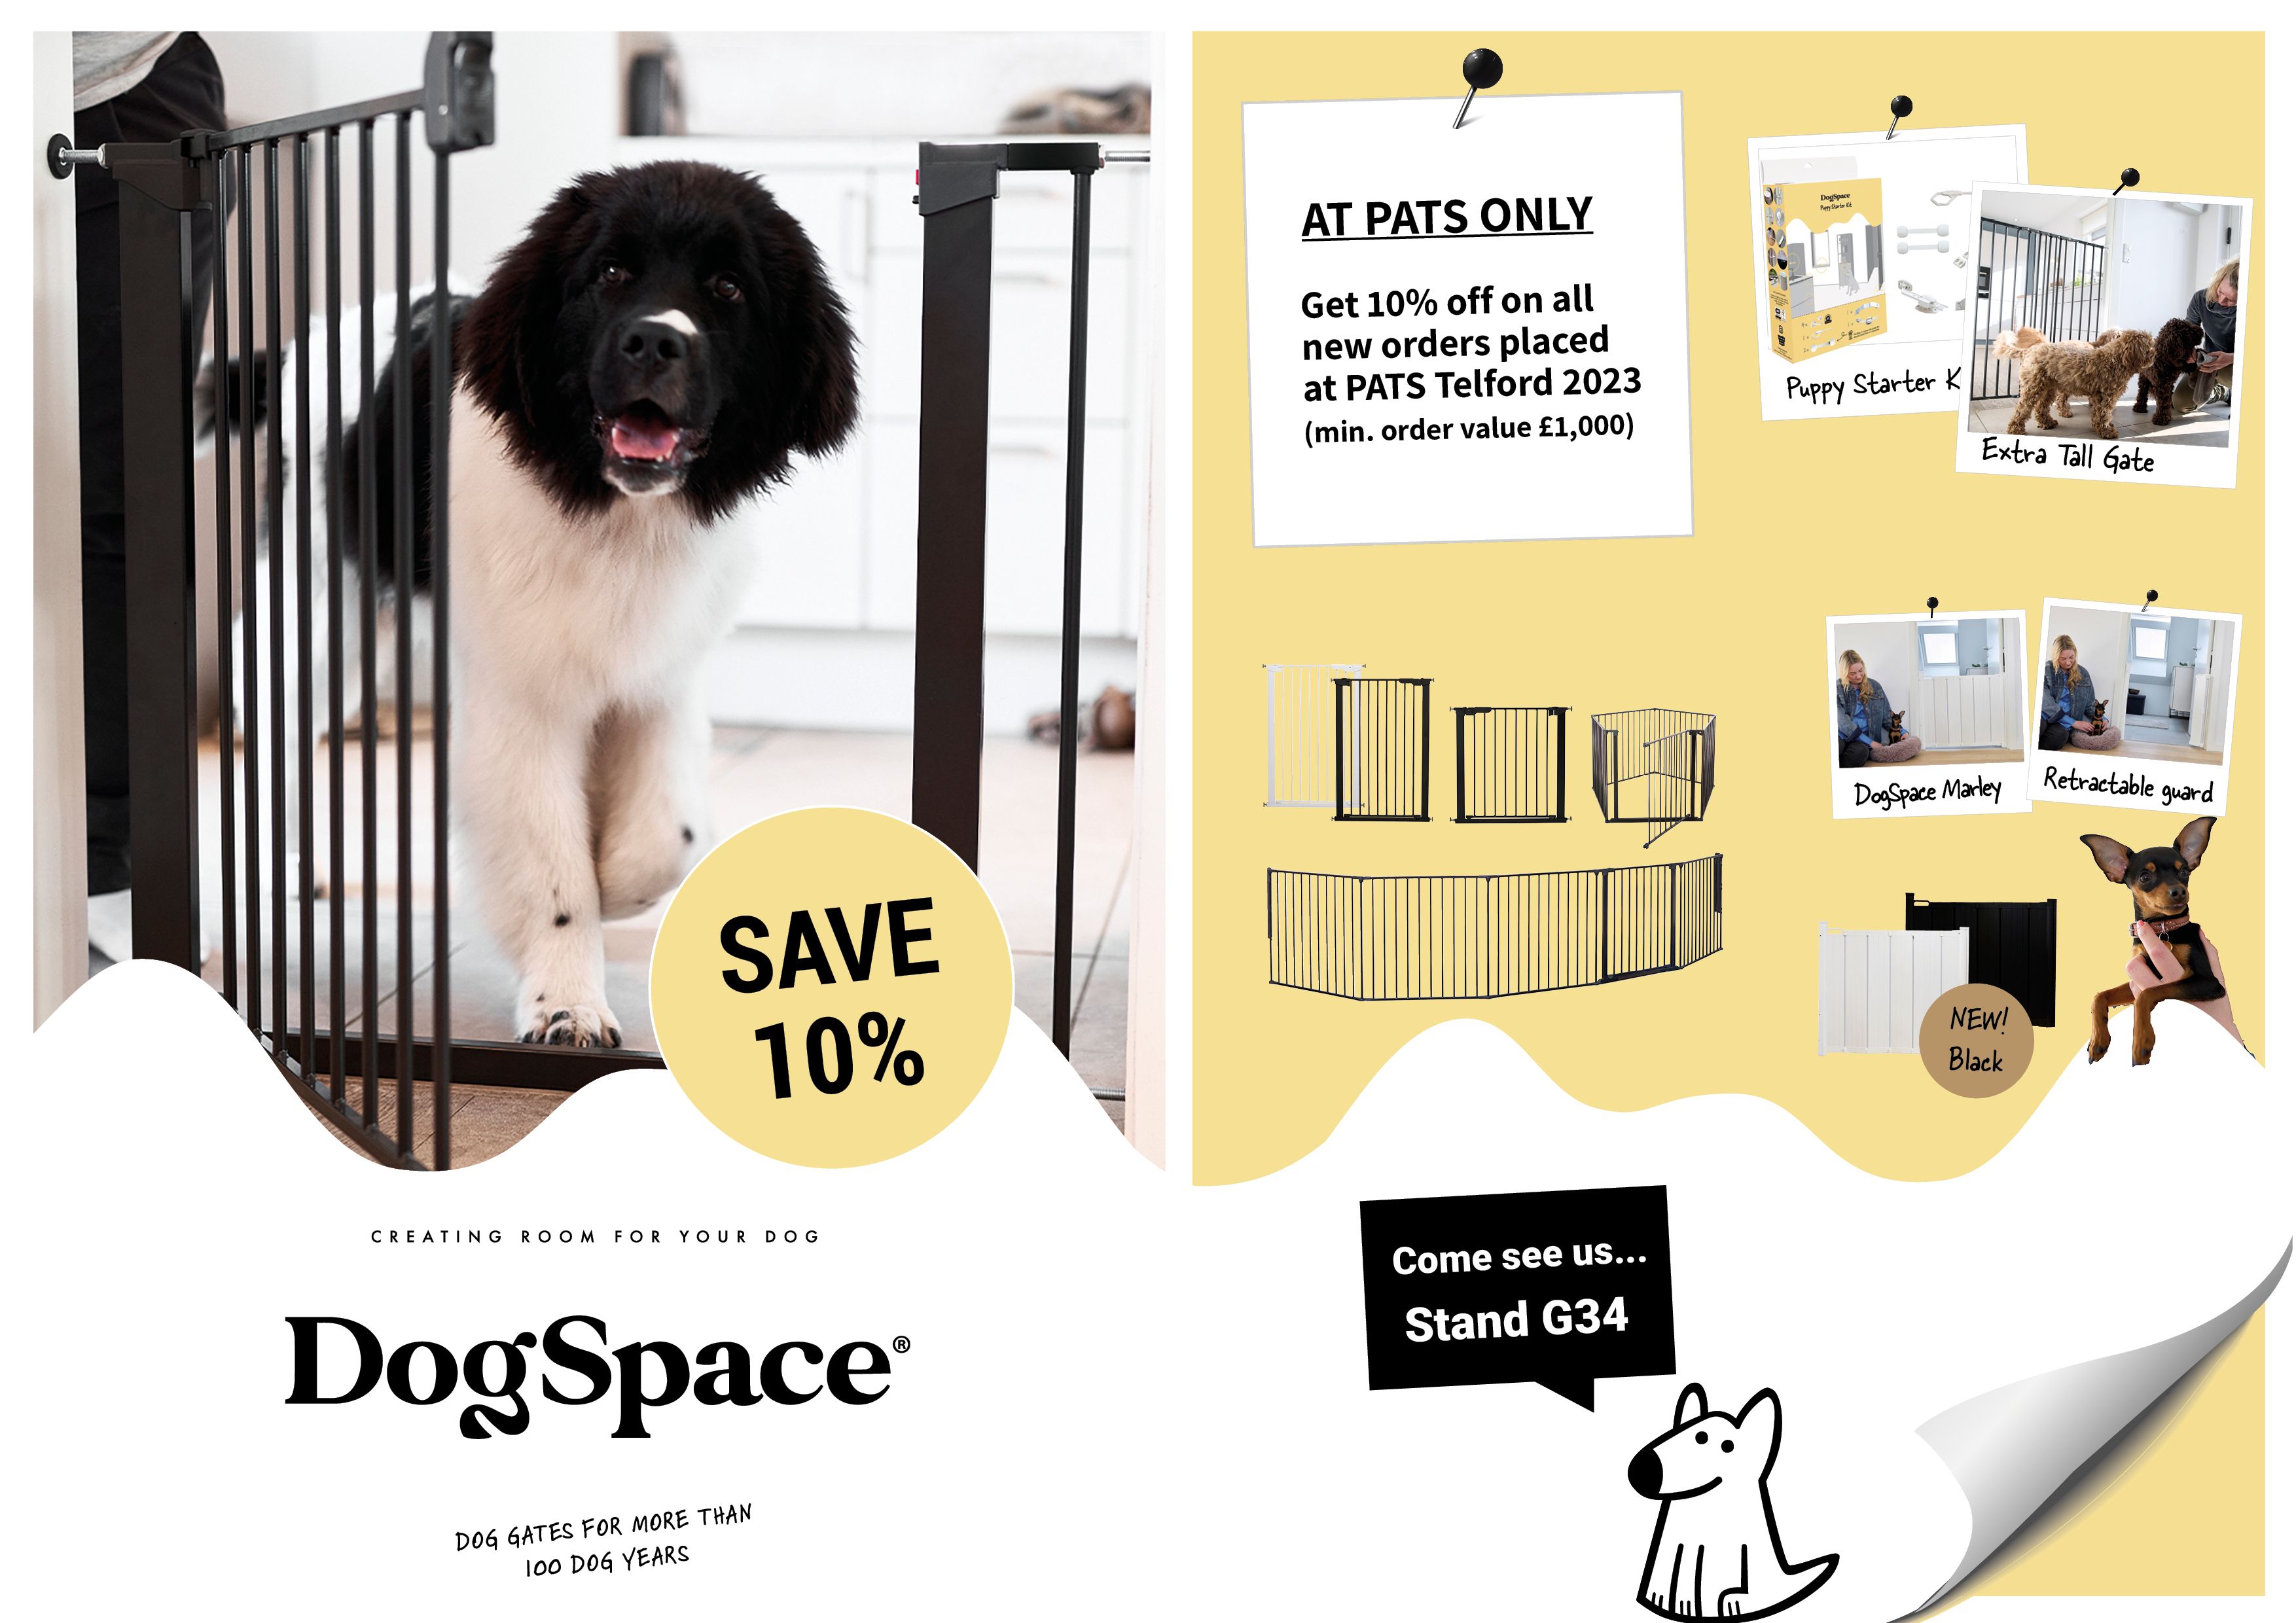 Save 10% on DogSpace